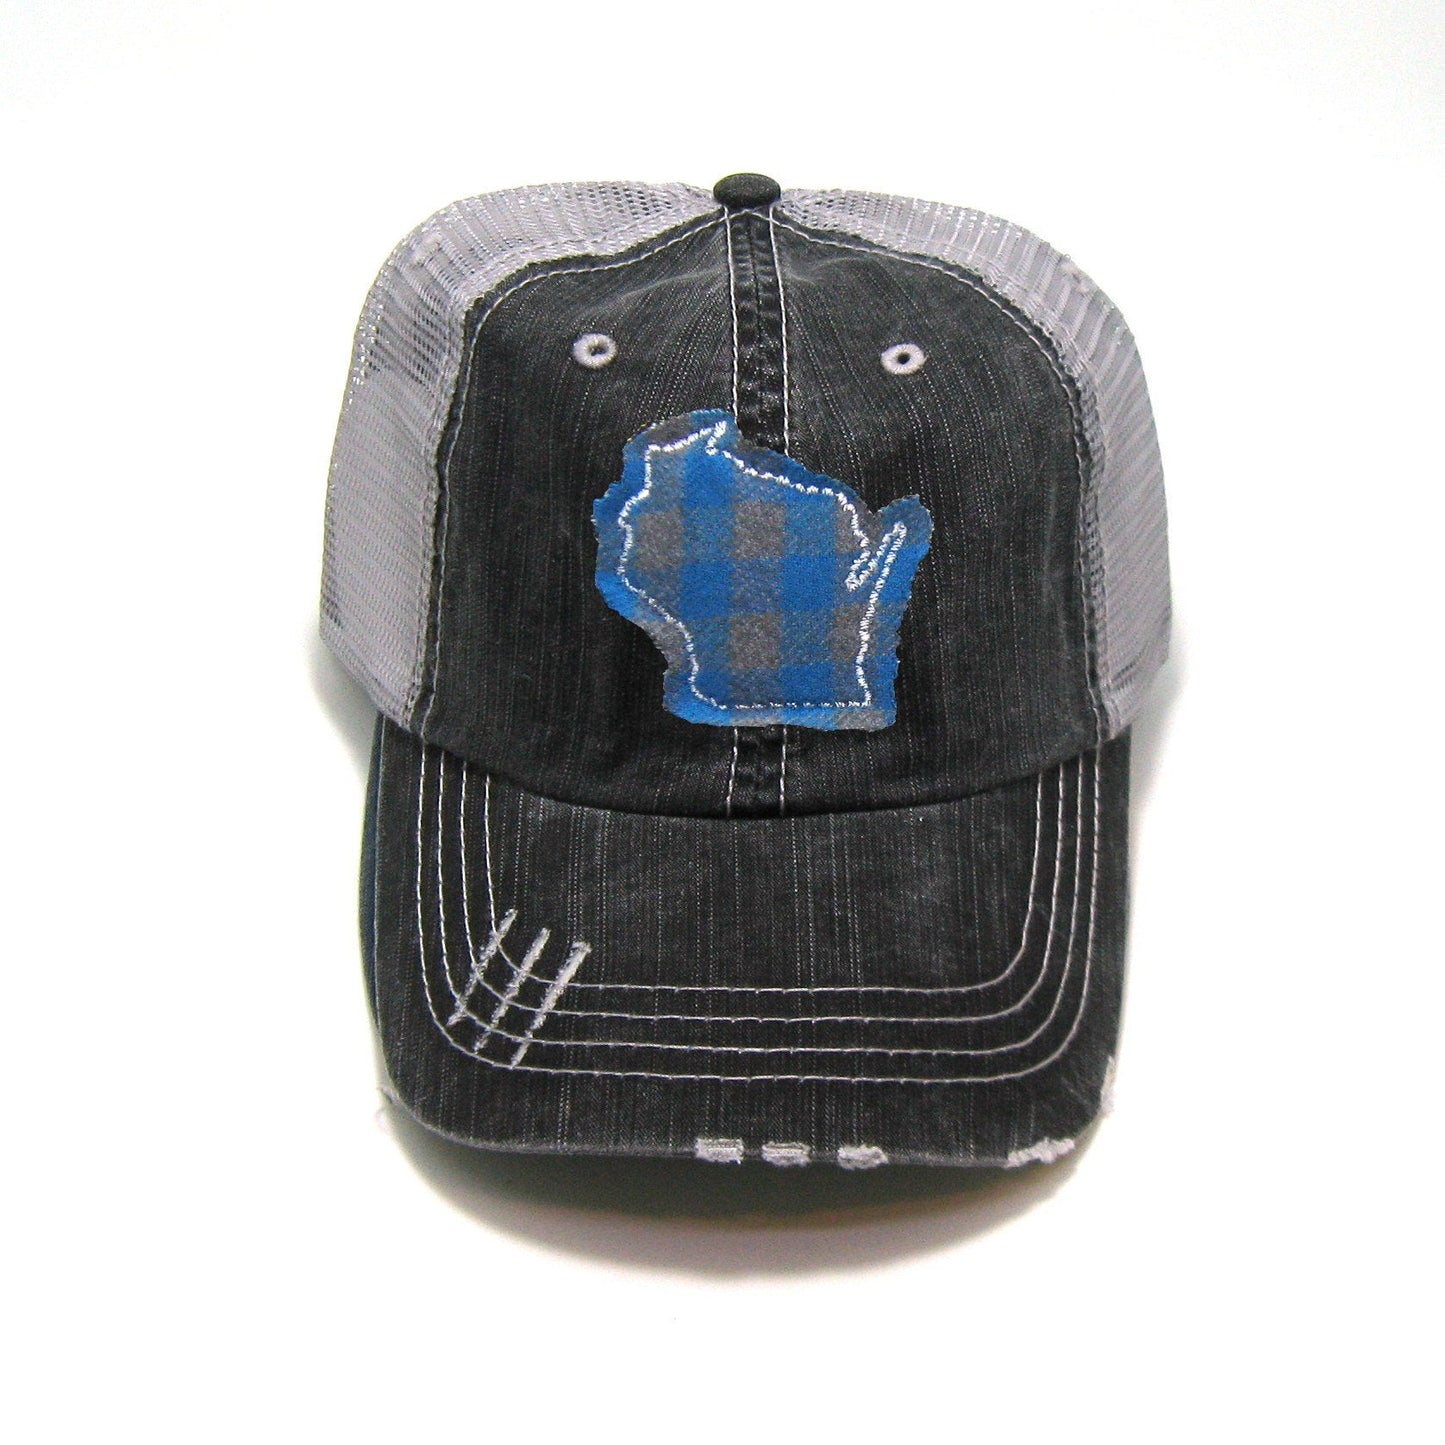 Gray Distressed Trucker Hat - Teal Buffalo Check - All US States